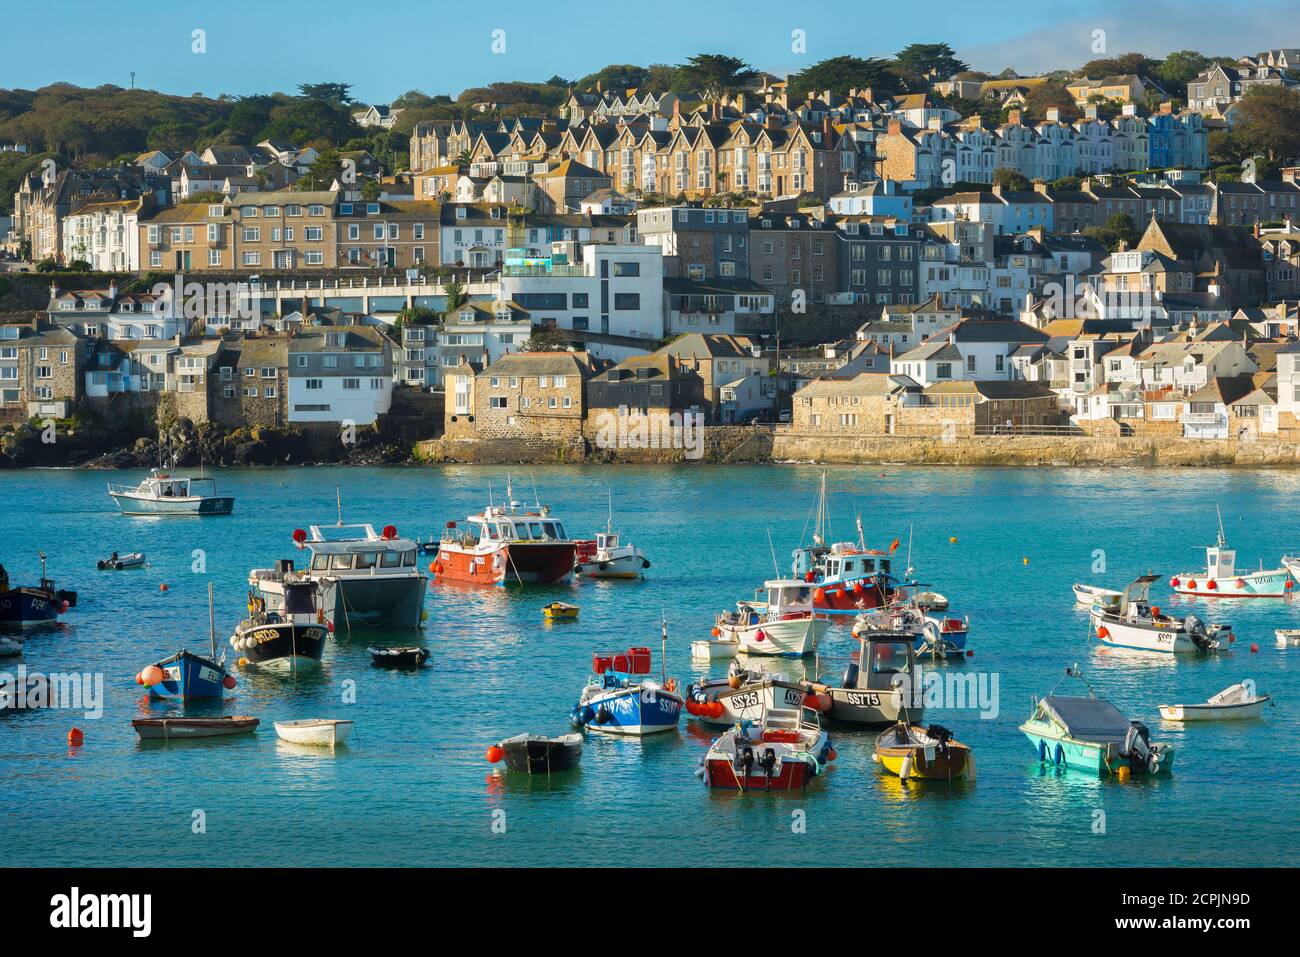 UK England fishing town, view in summer of fishing boats moored in St Ives harbour, Cornwall, south west England, UK Stock Photo